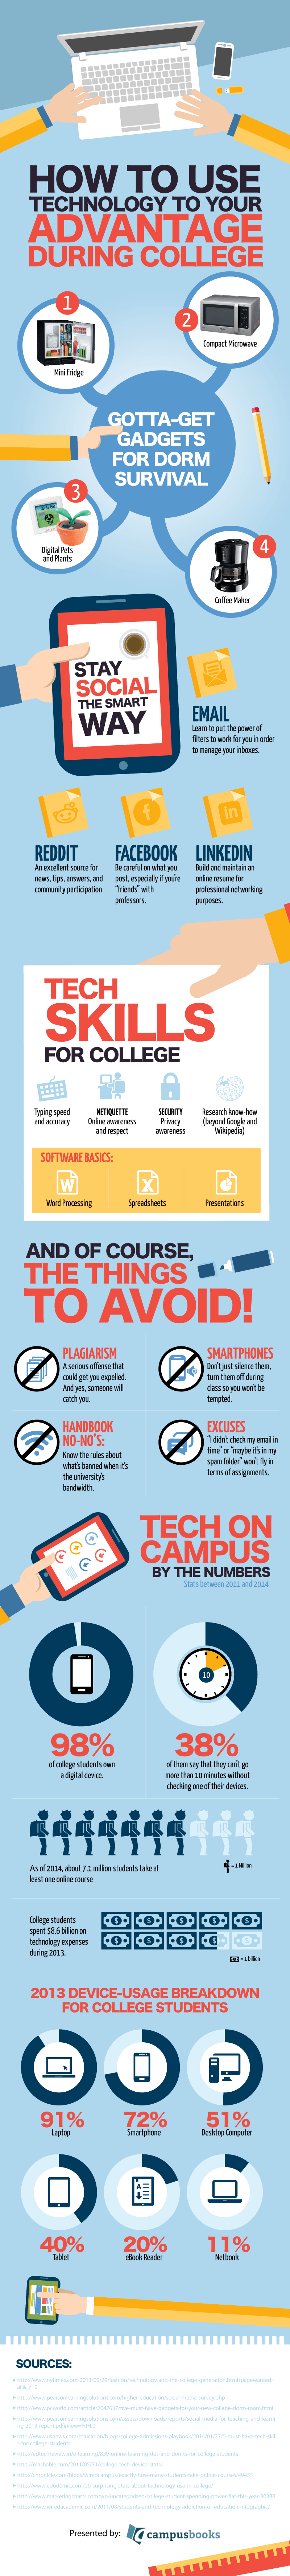 How to Use Technology to Your Advantage During College Infographic